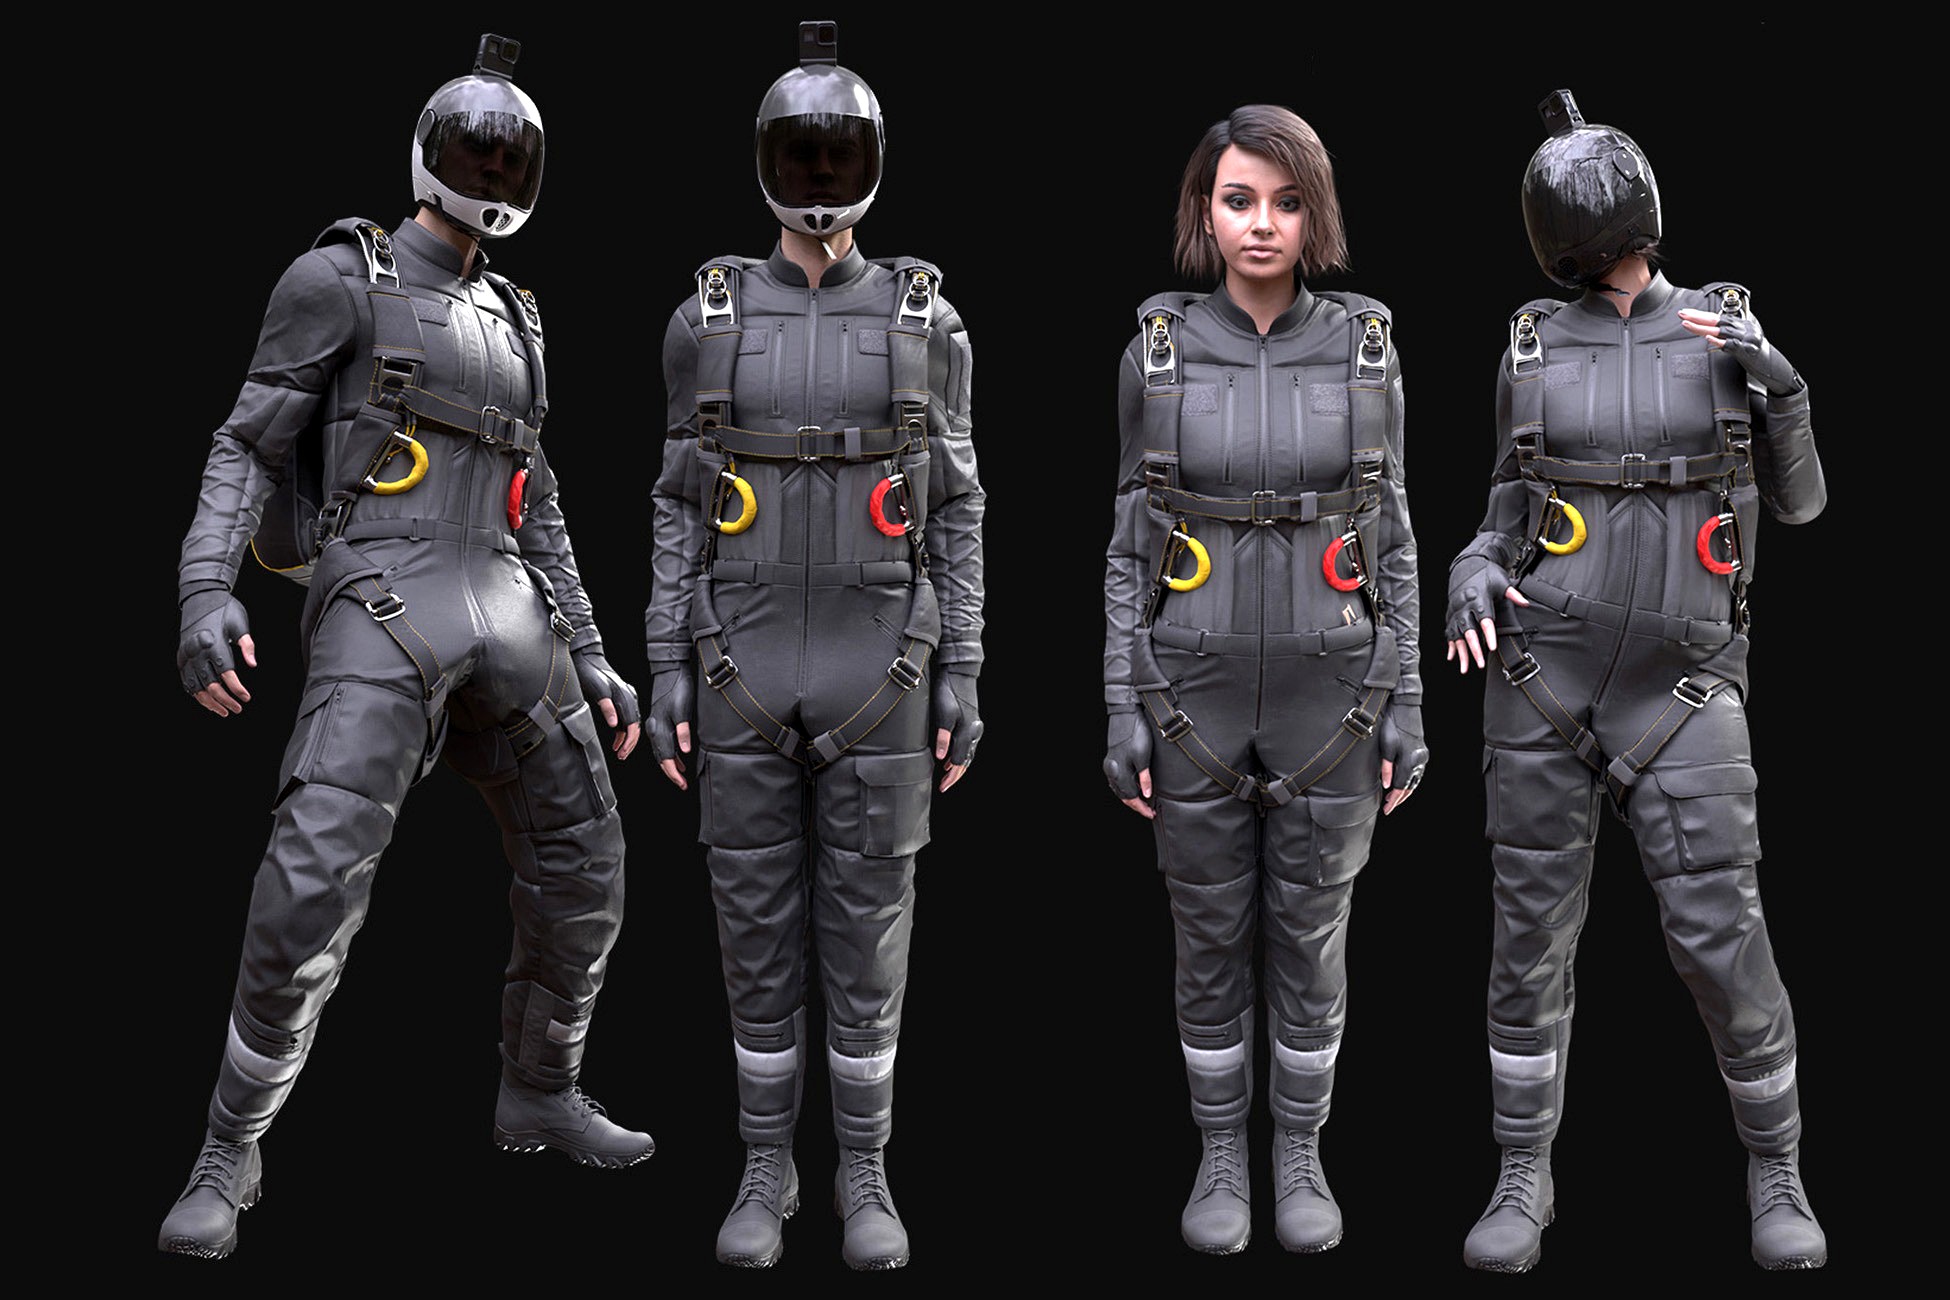 Collection 5 - Man/Woman Skydiving Suit - Rigged